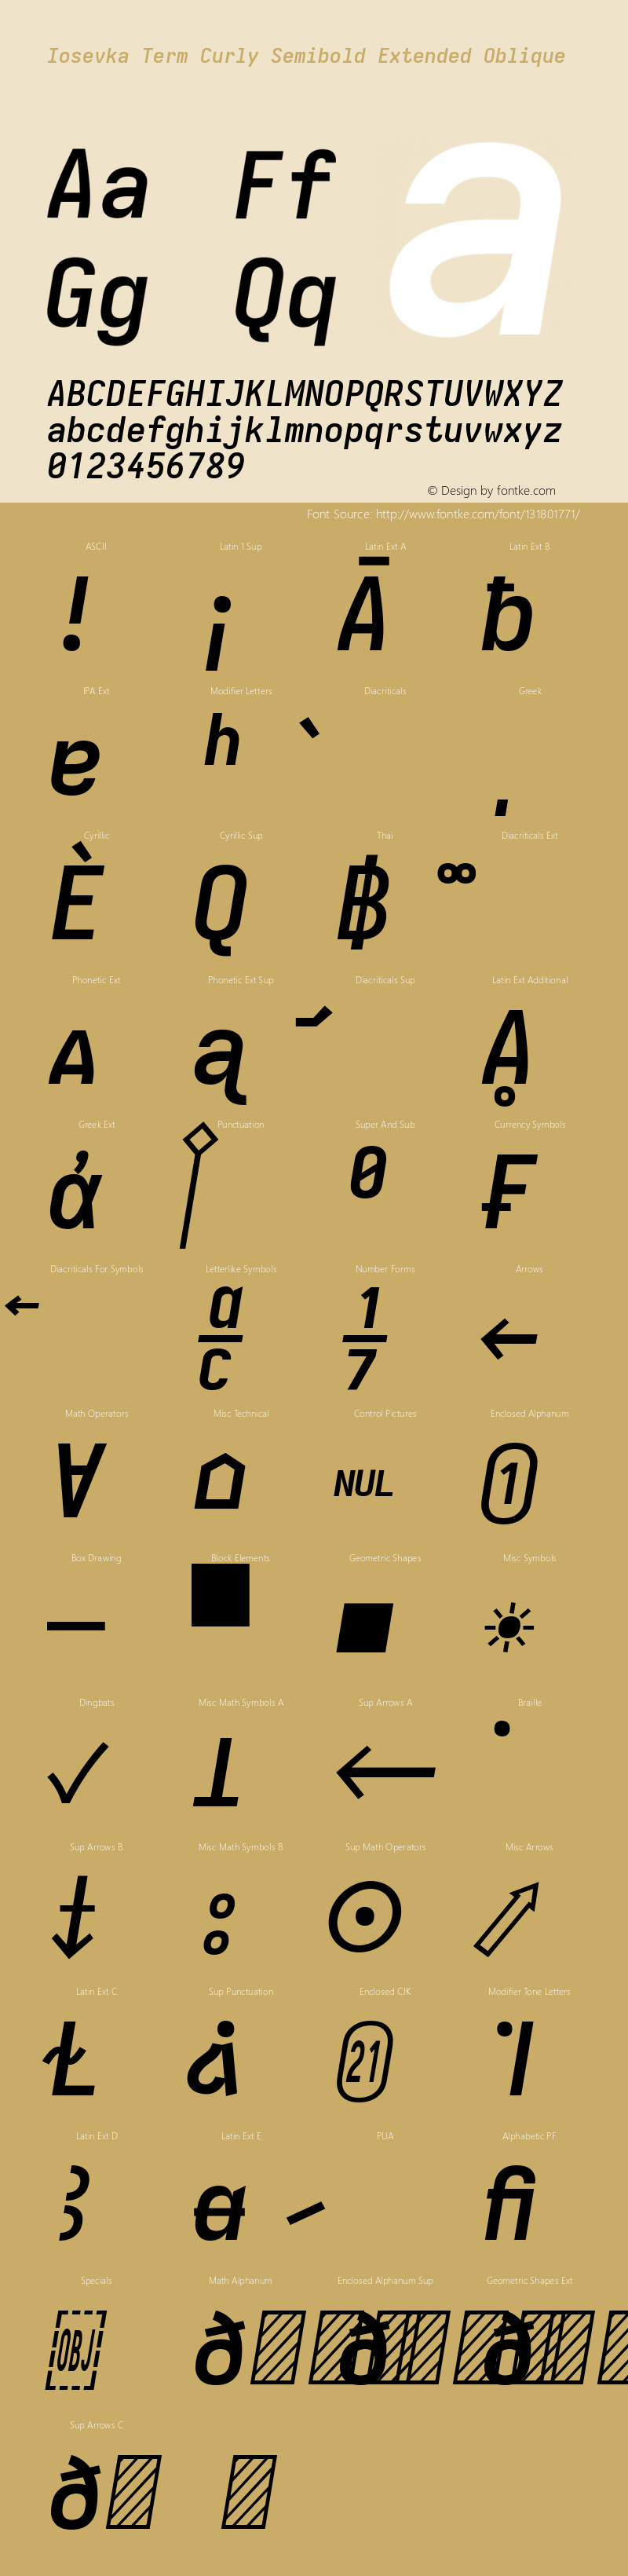 Iosevka Term Curly Semibold Extended Oblique Version 5.0.8; ttfautohint (v1.8.3) Font Sample